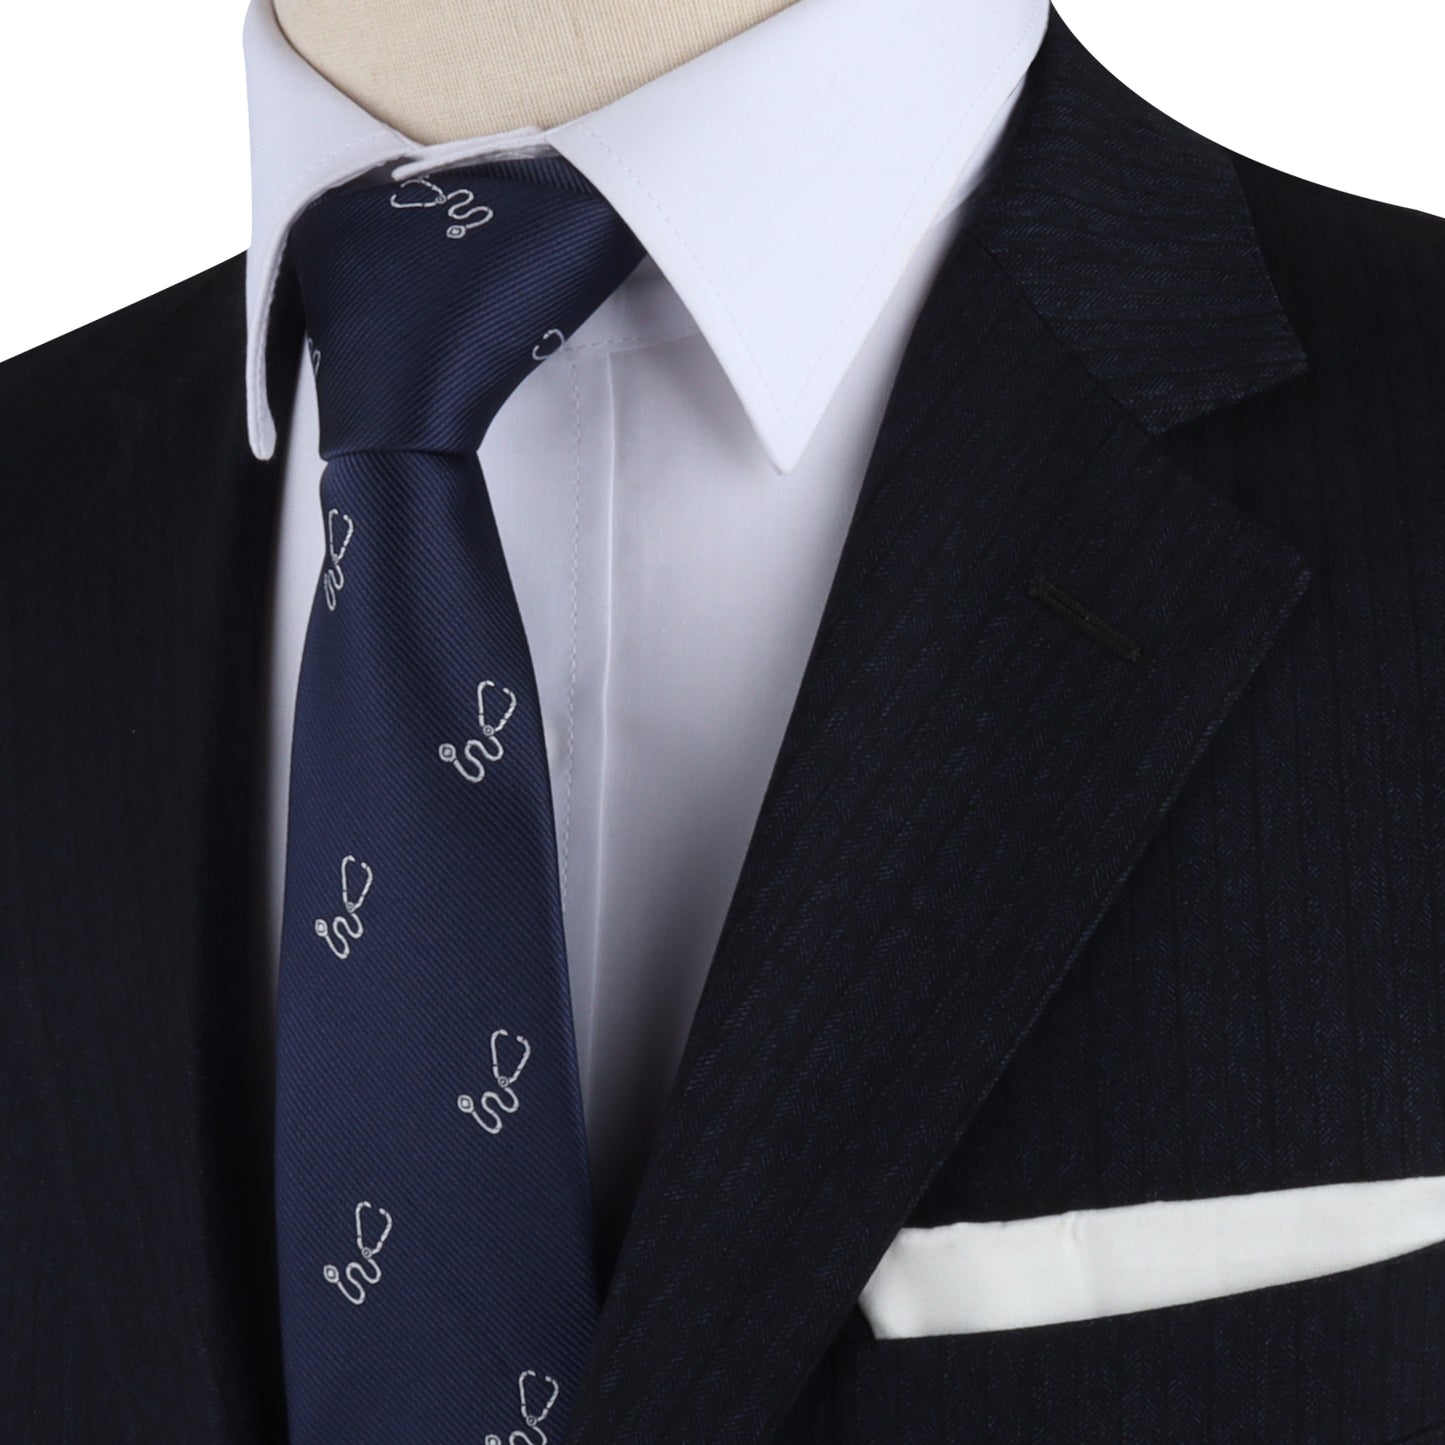 An extraordinary Stethoscope Skinny Tie wearing a suit and tie.